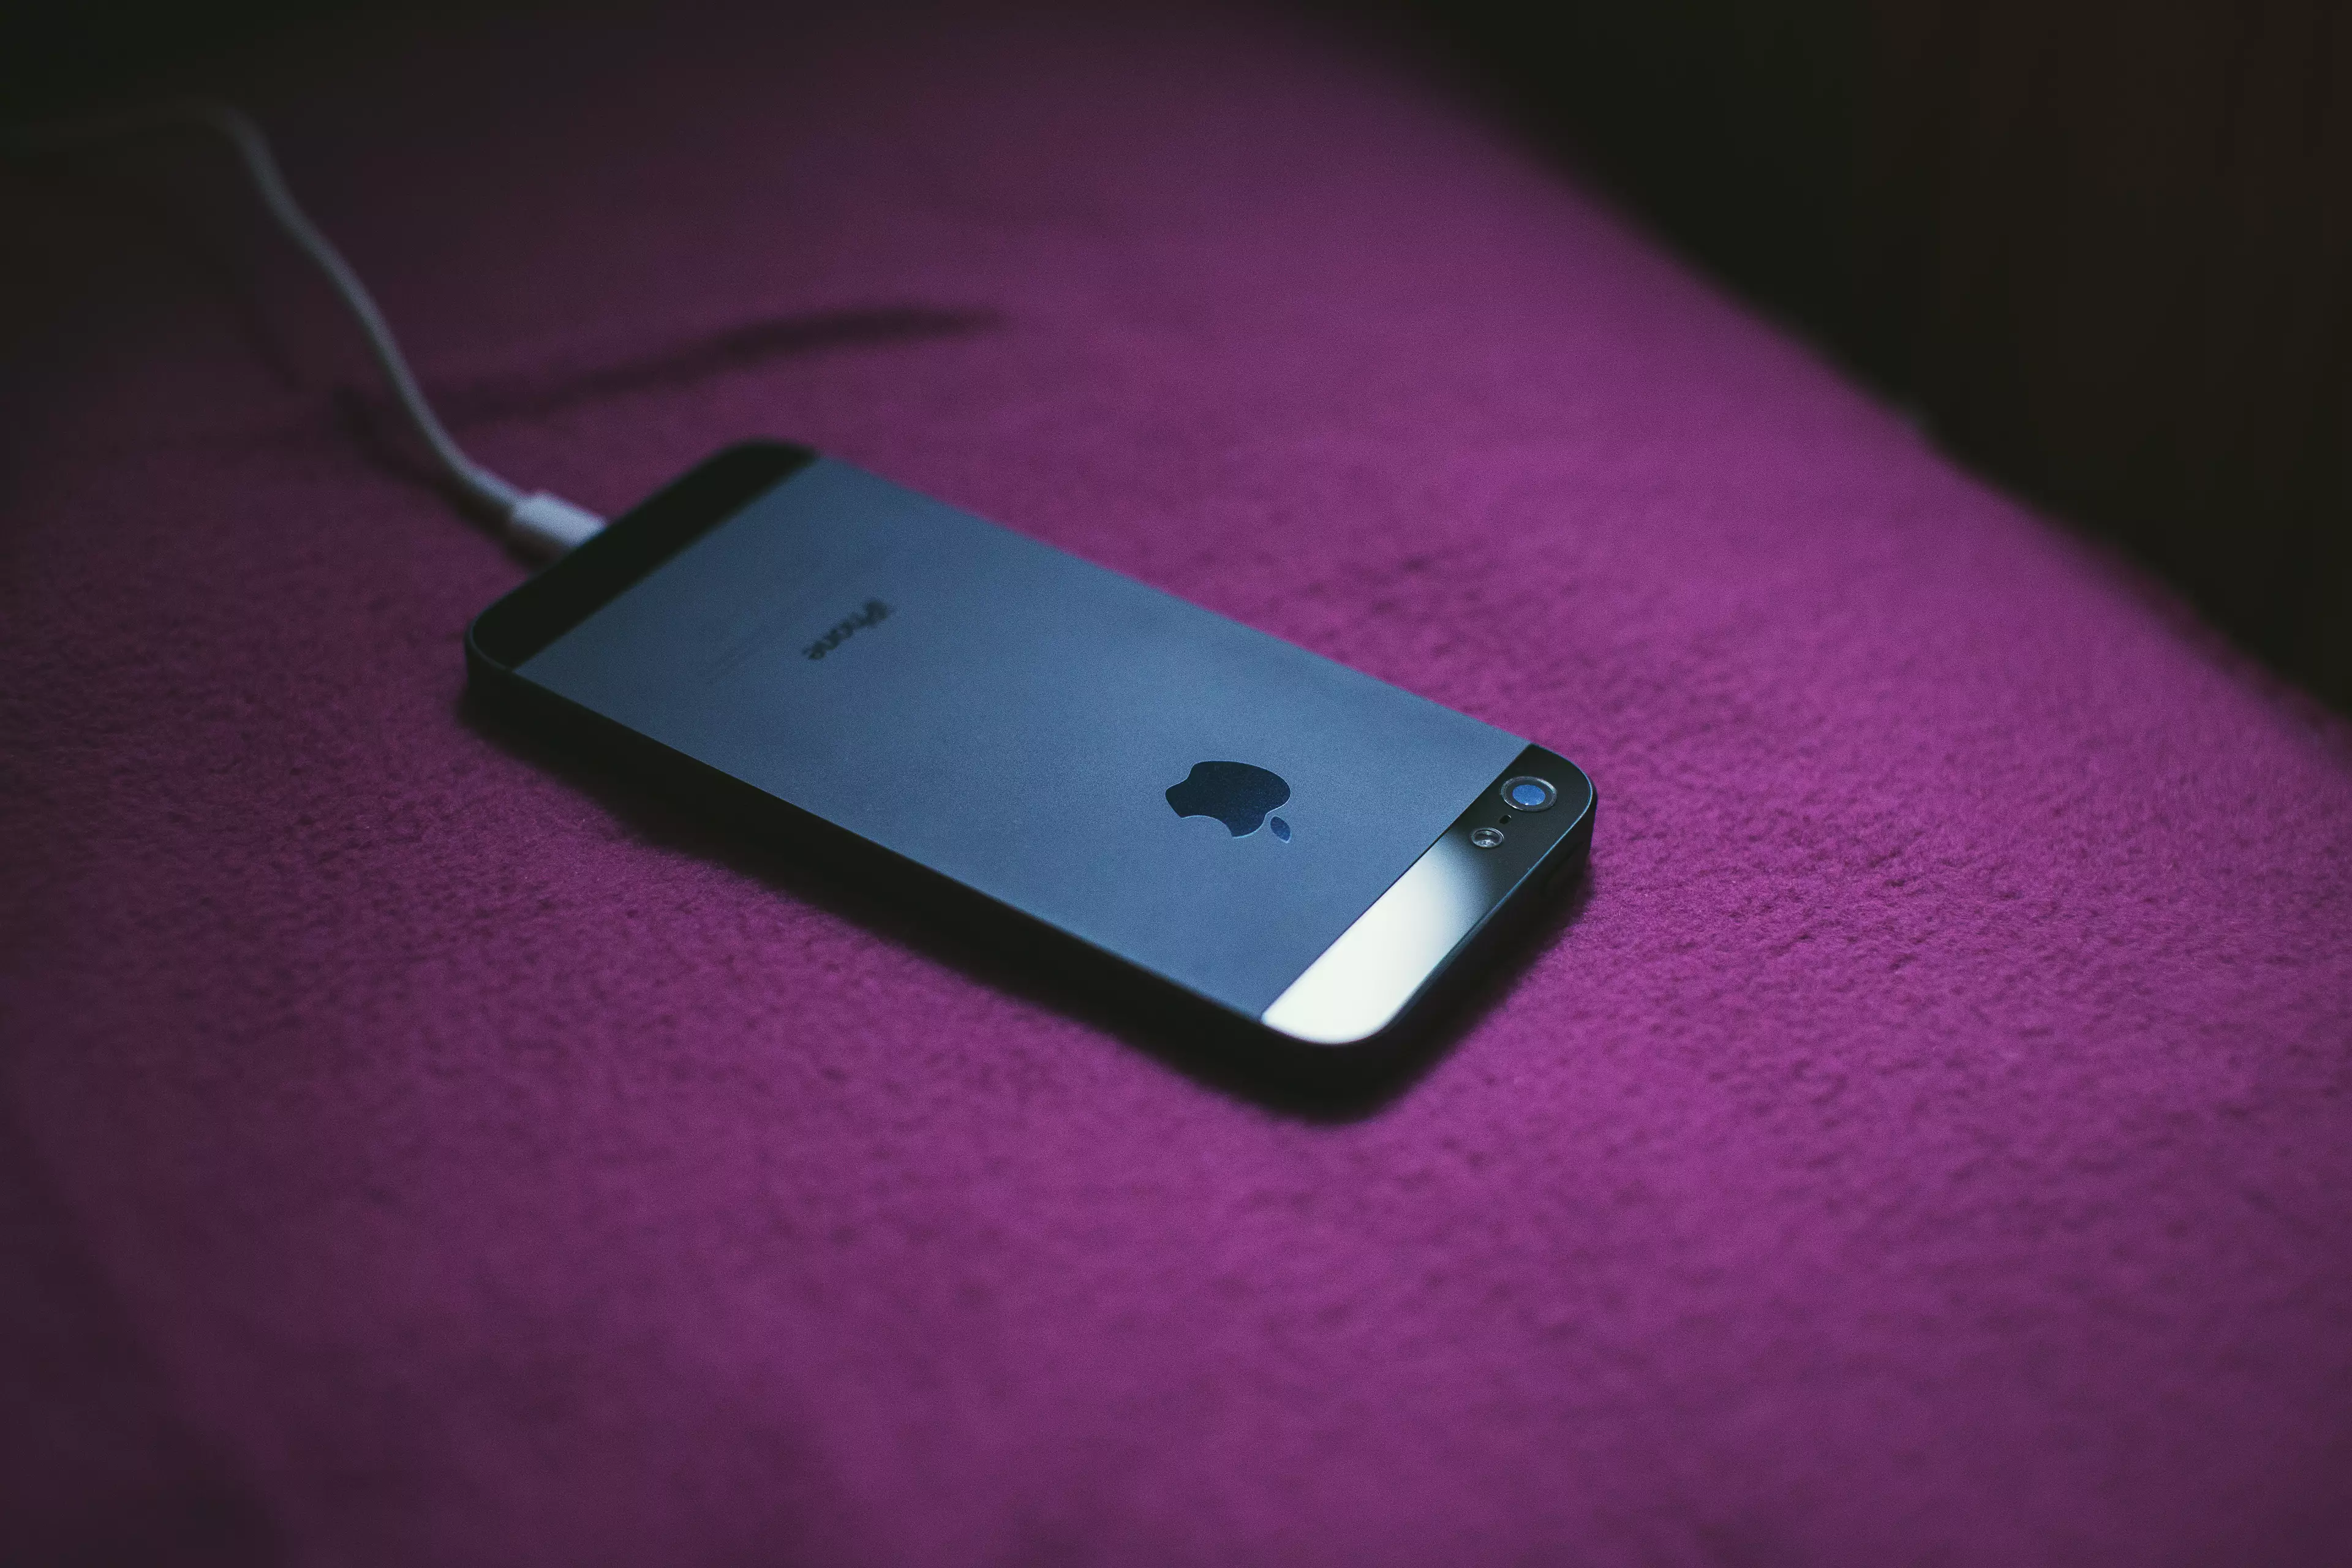 Stock image of a phone charging.